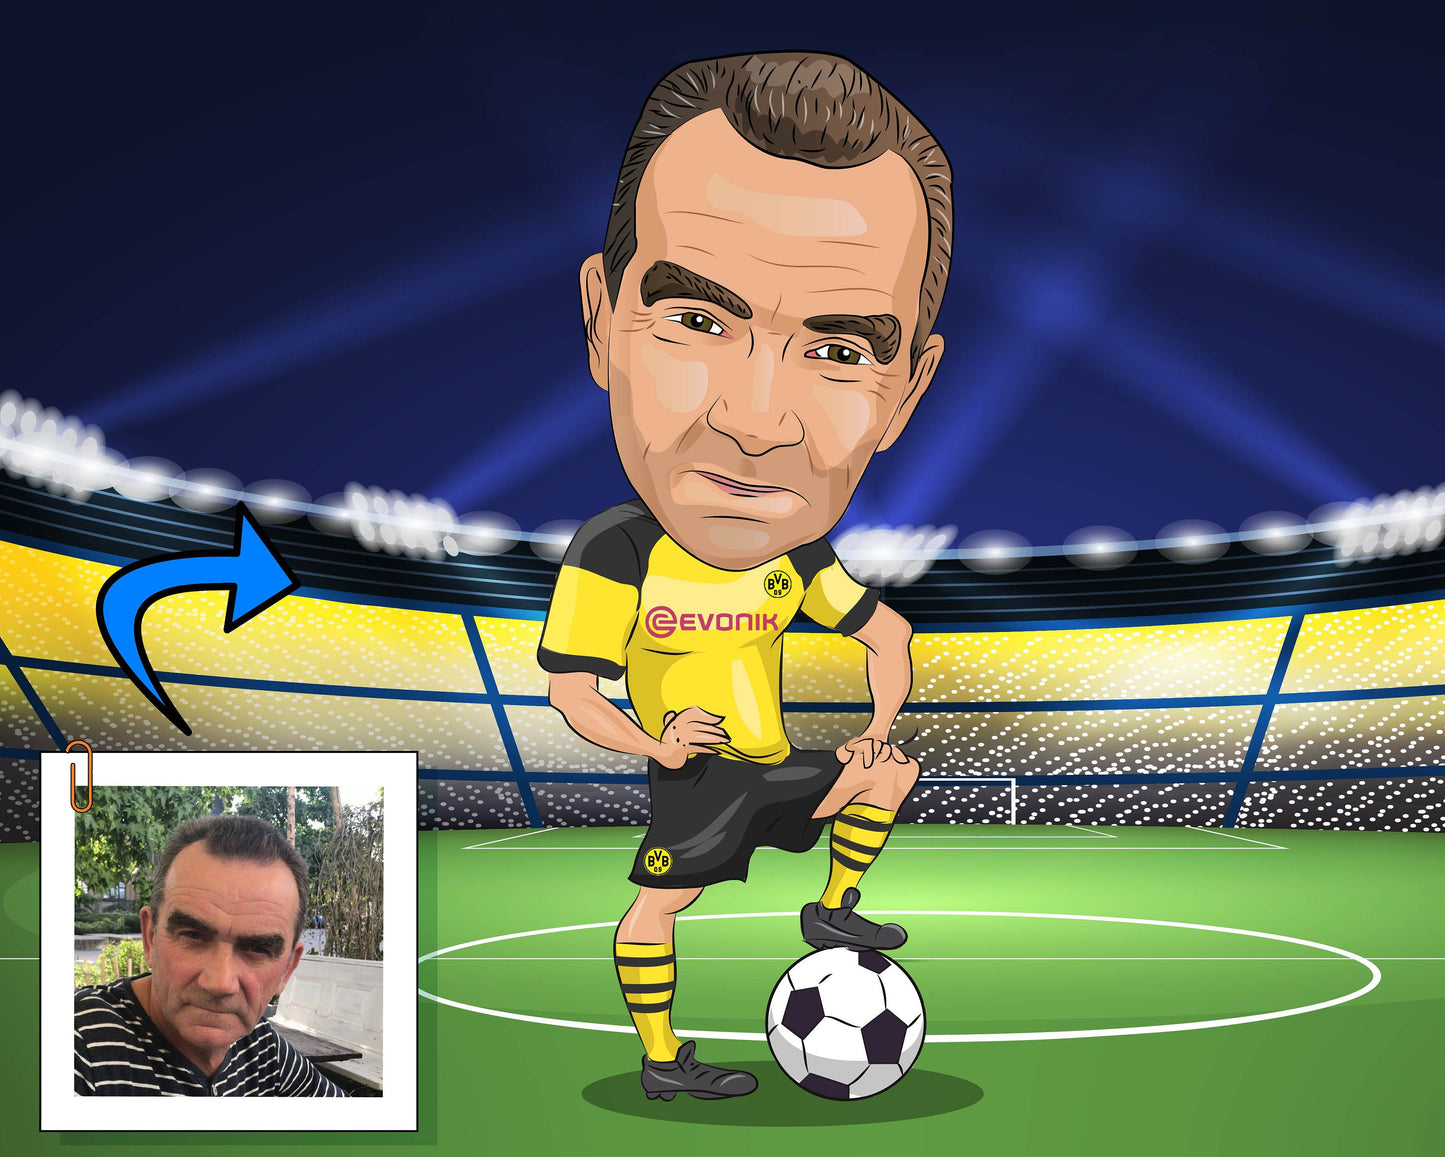 Soccer Coach Gift - Custom Caricature Portrait From Your Photo/Football Coach Gift